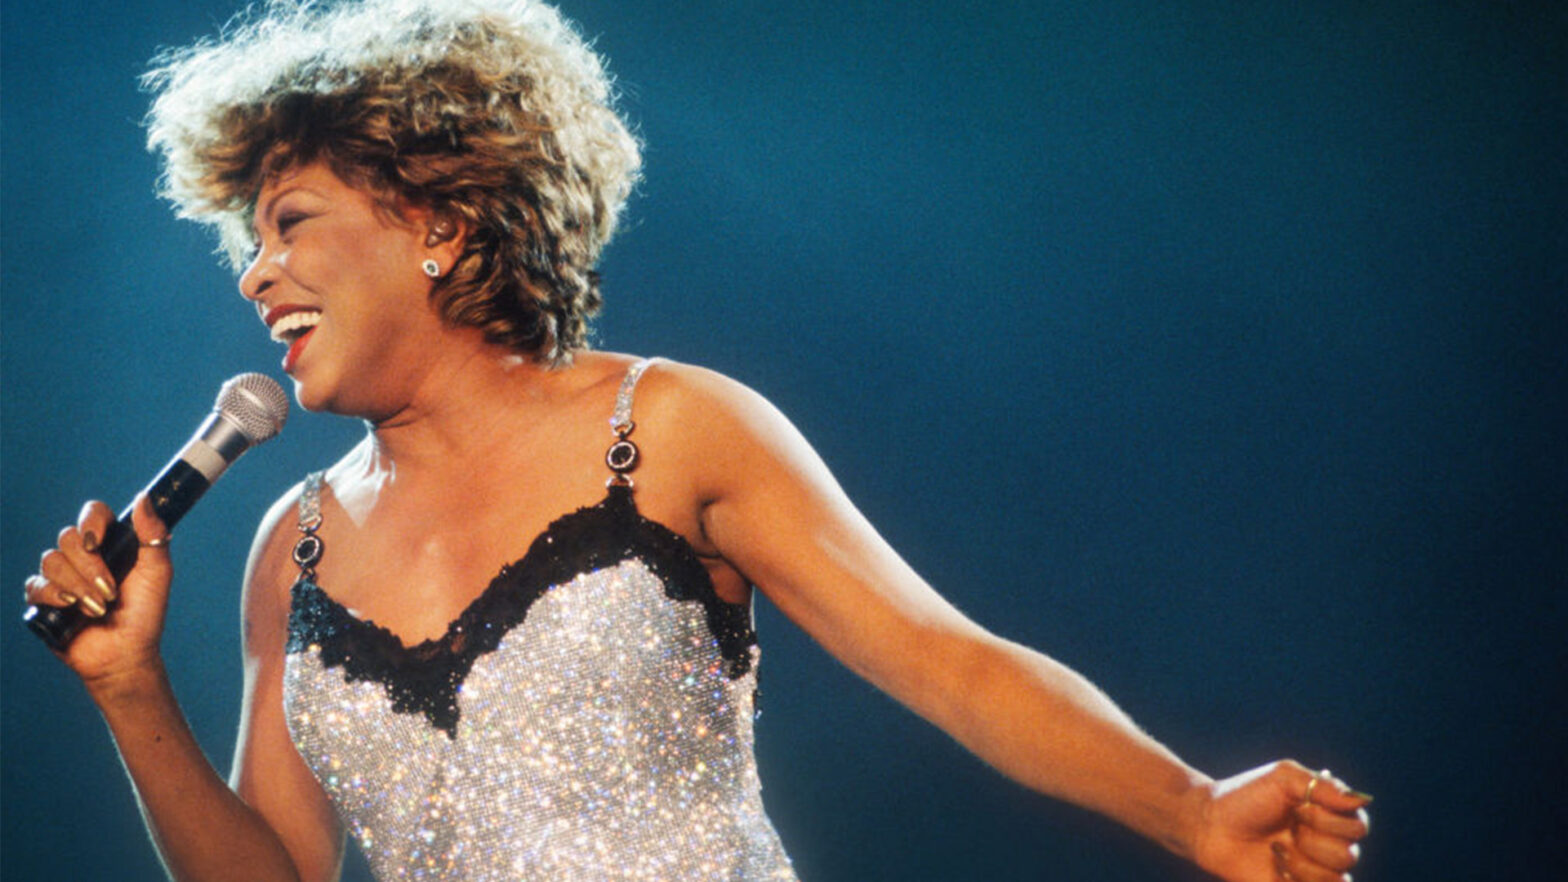 Tina Turner's Recordings Rake In An Estimated $3.7M Annually, Report Says